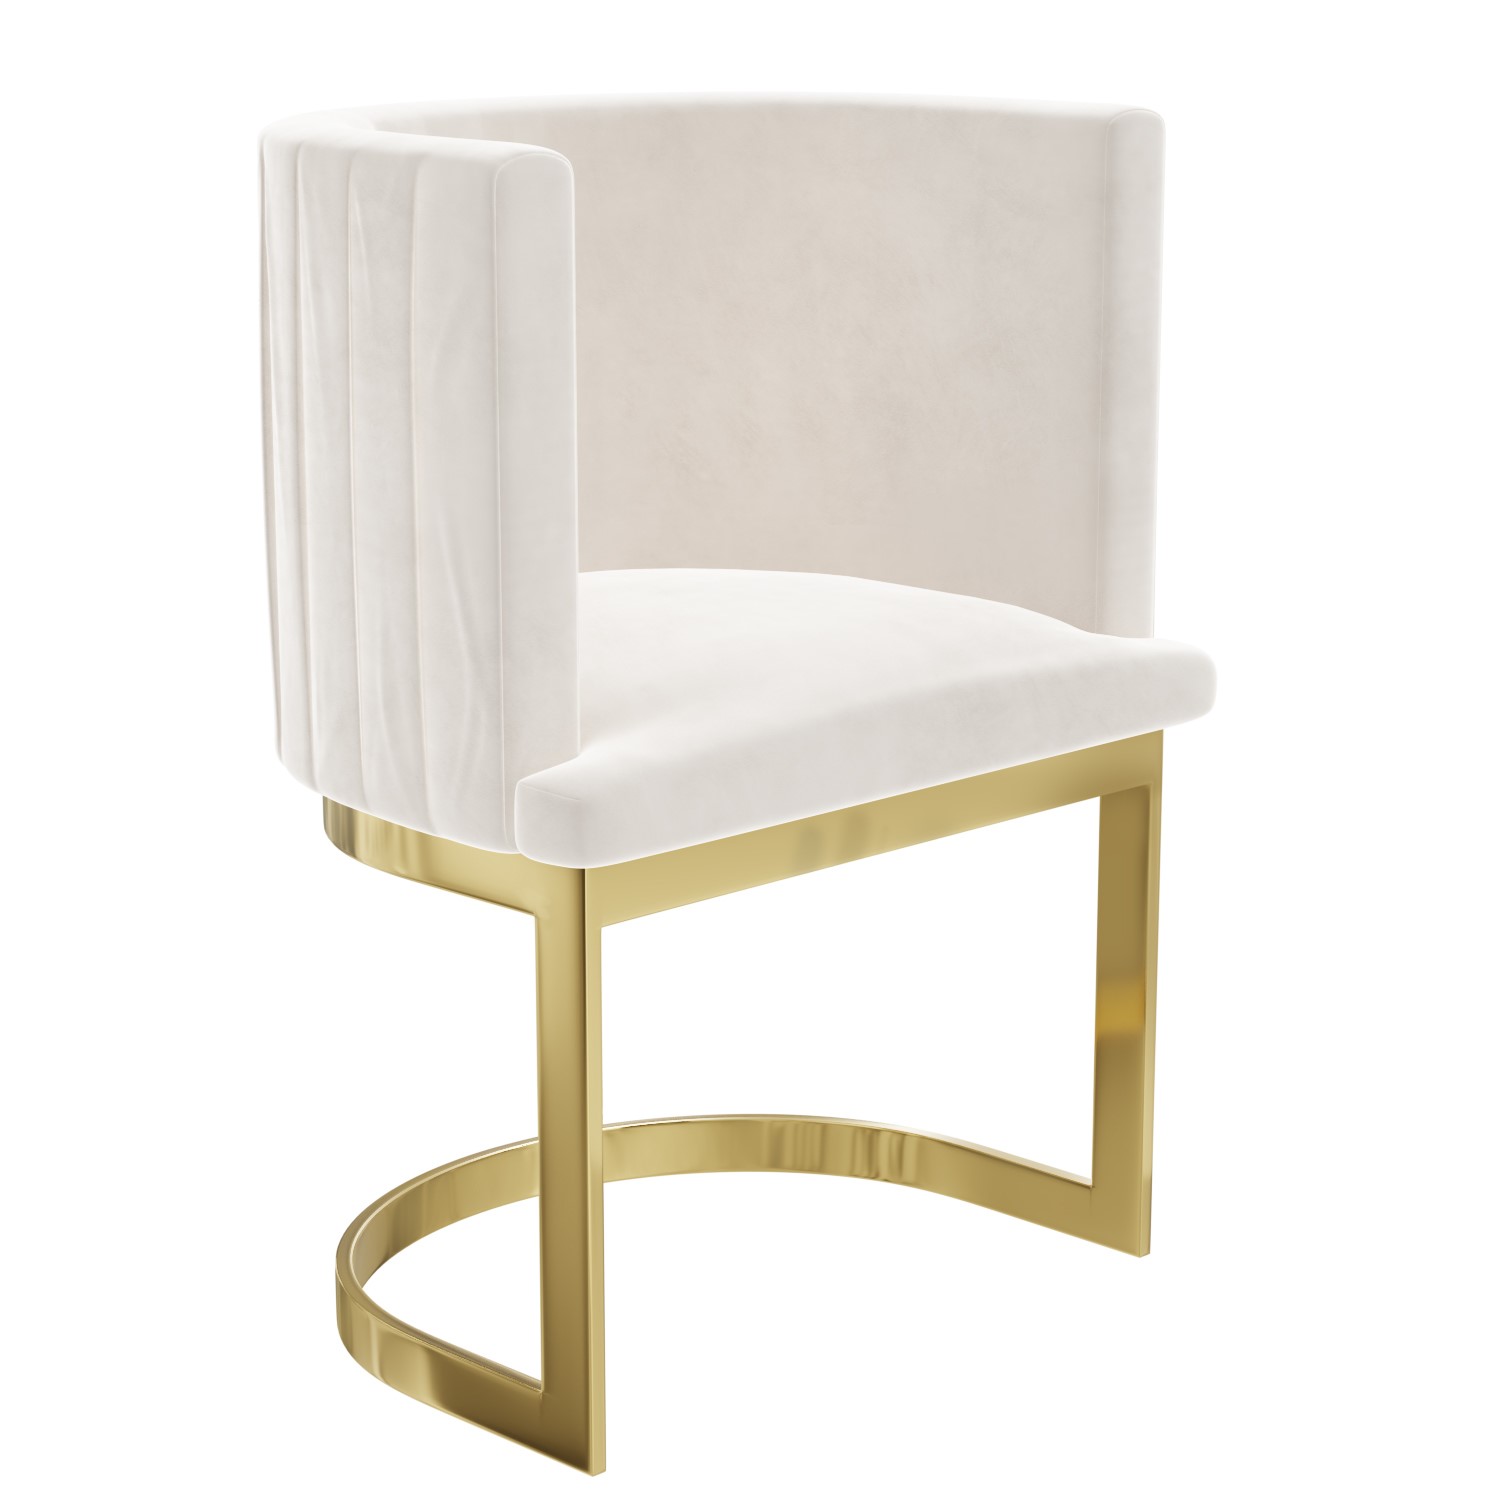 Read more about Off white velvet cantilever dressing table chair with gold legs zelena